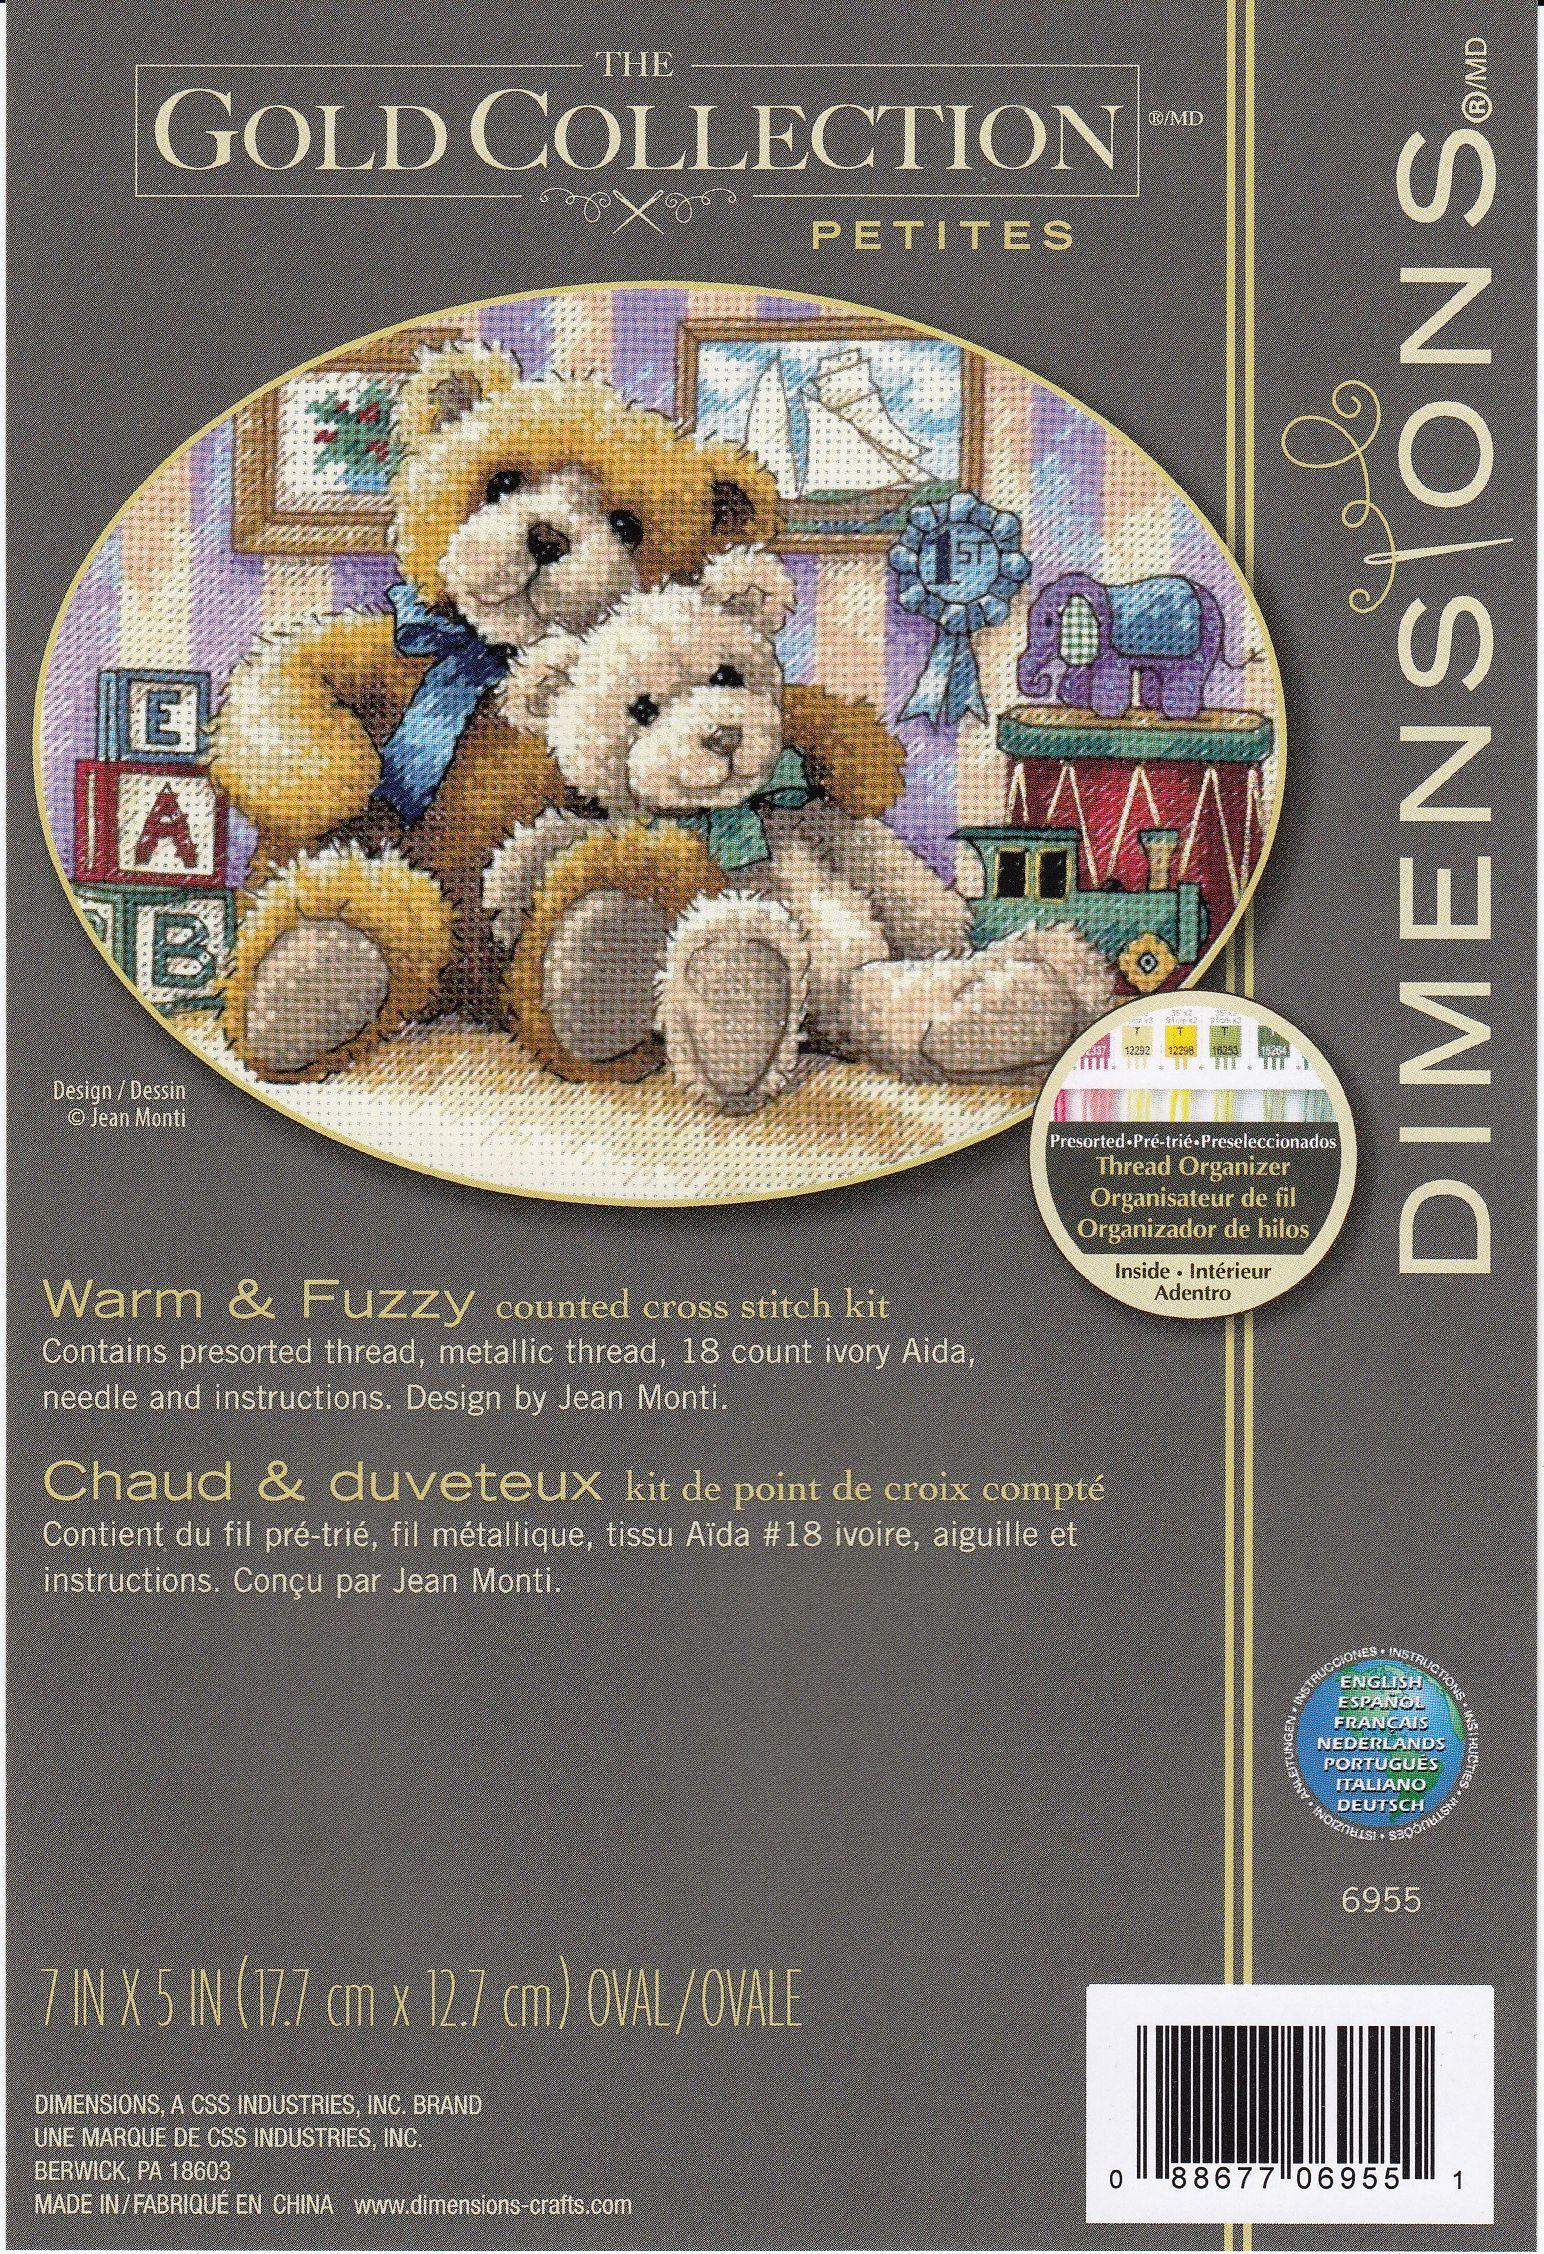 WARM & FUZZY, Counted Cross Stitch Kit, 18 count ivory Aida, DIMENSIONS, Gold Collection (06955) - Leo Hobby